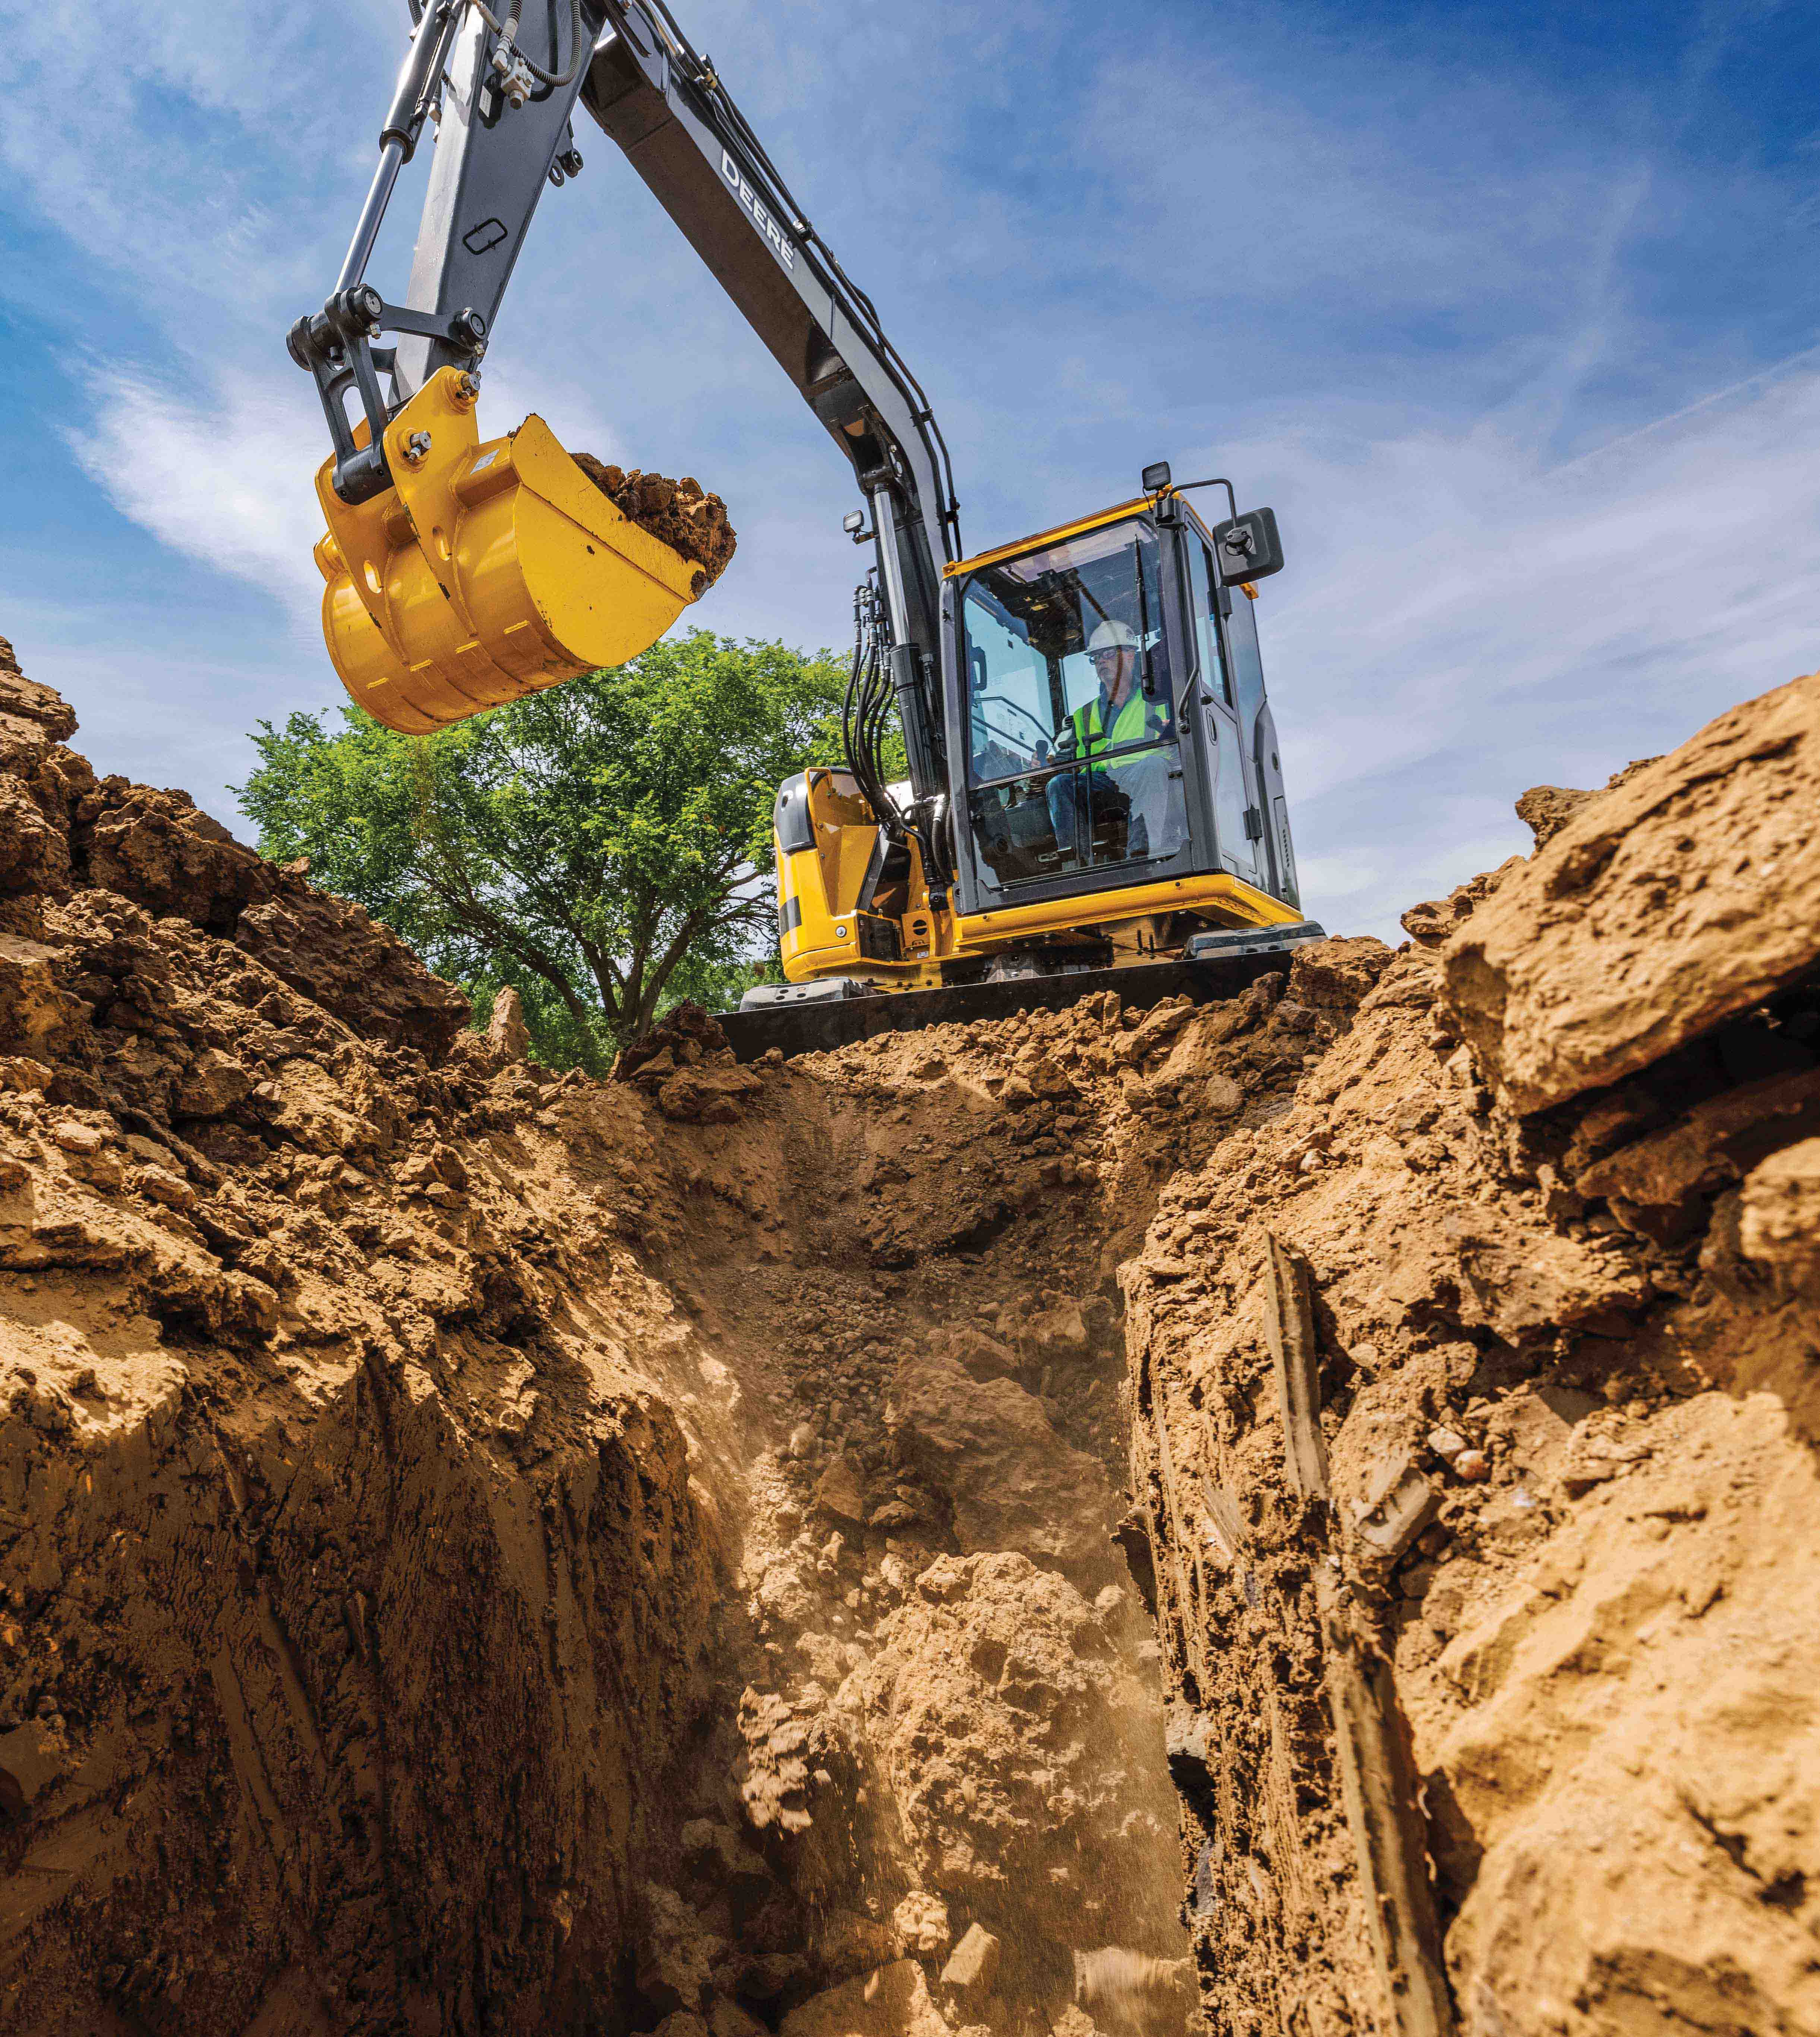 John Deere Excavator works on digging a large hole with blue sky in the background